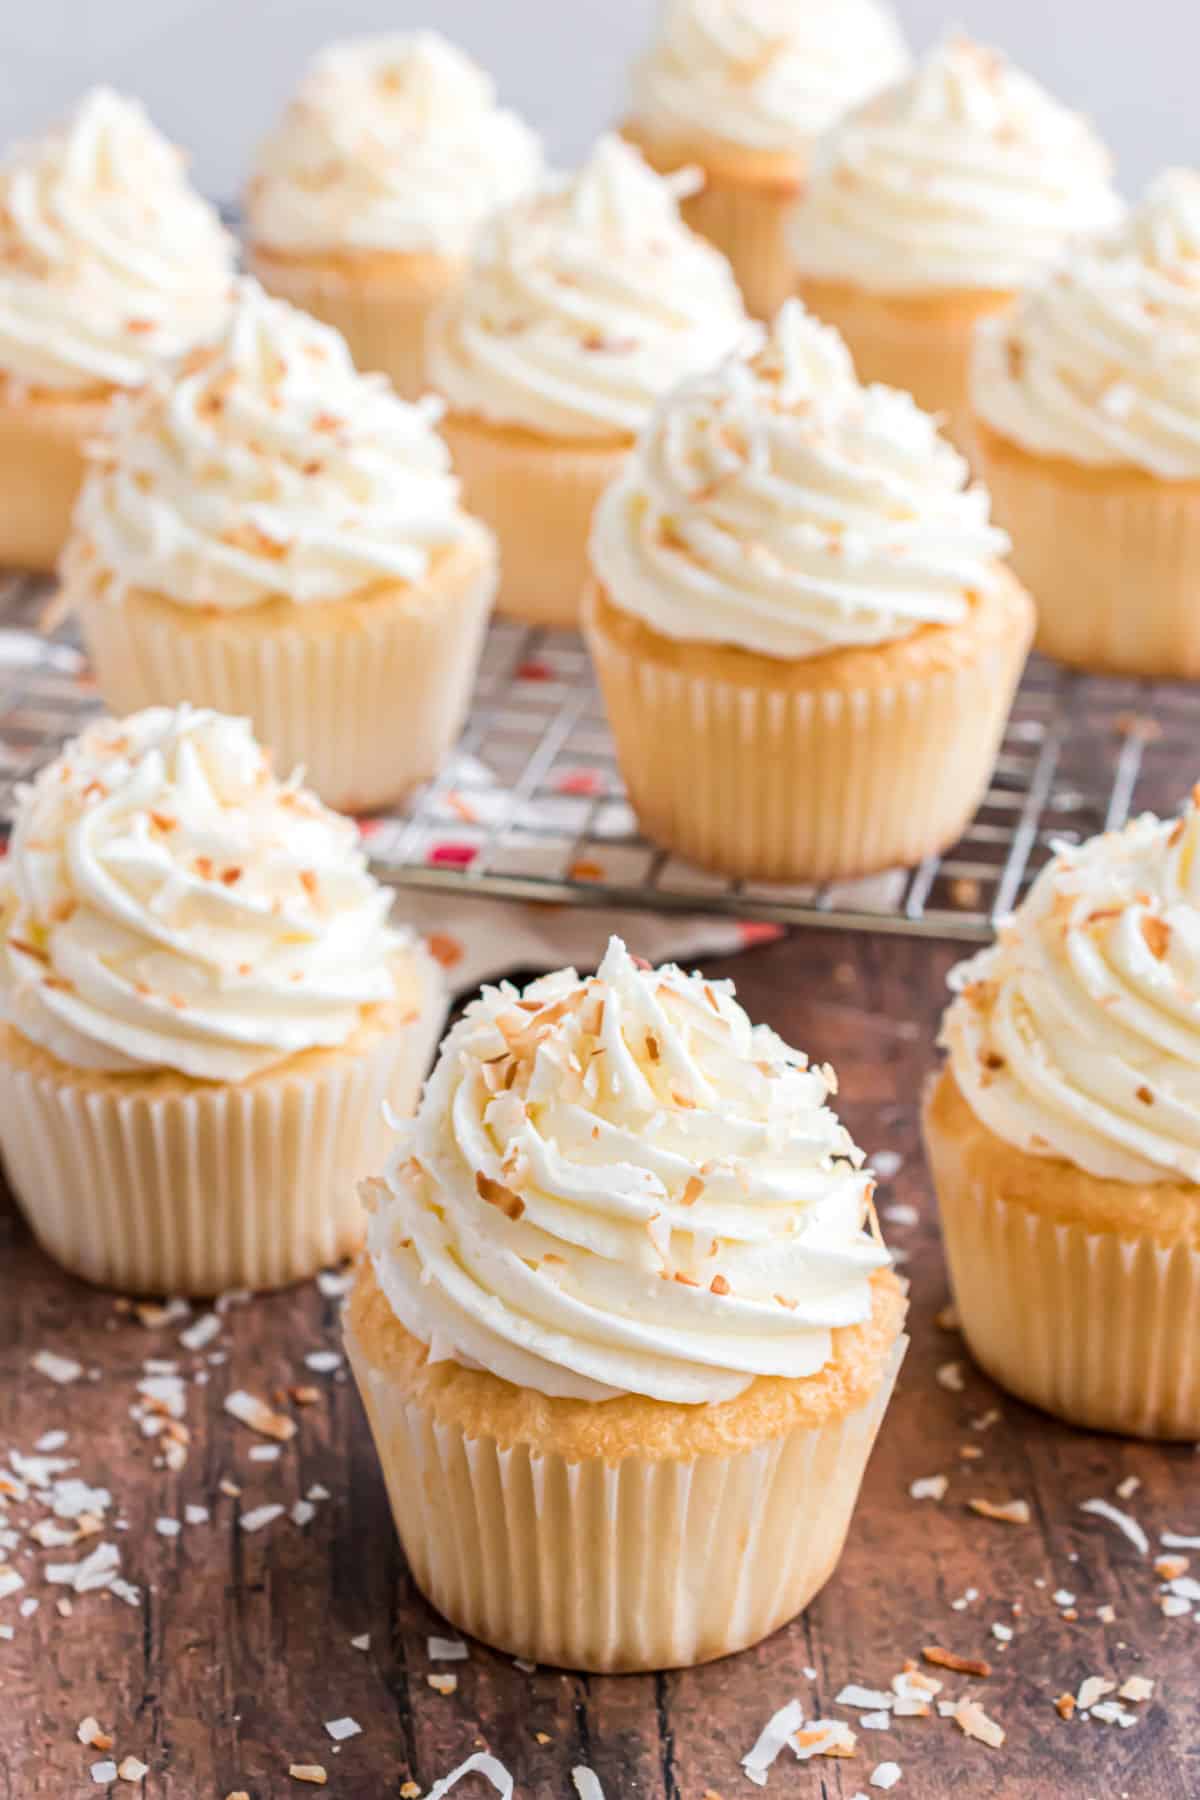 Toasted coconut topped cupcakes.